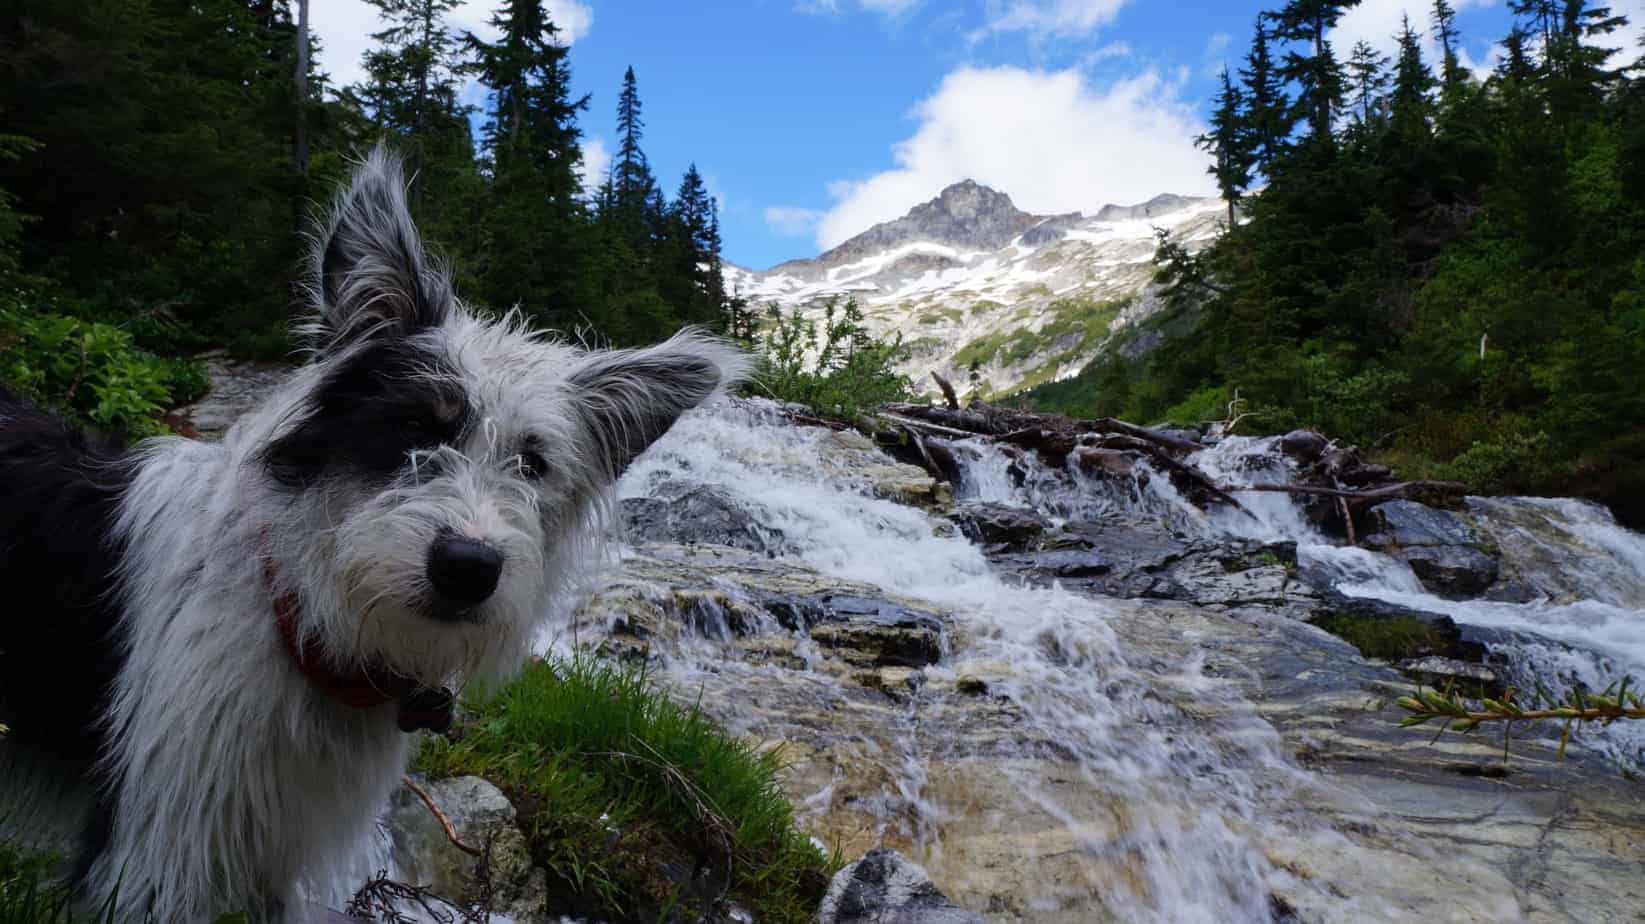 Dog enjoys standing by mountain stream. Take steps to hike with your dog. Protect paws, bring water, don't forget the leash and make sure your dog is healthy and in good shape for the hike.